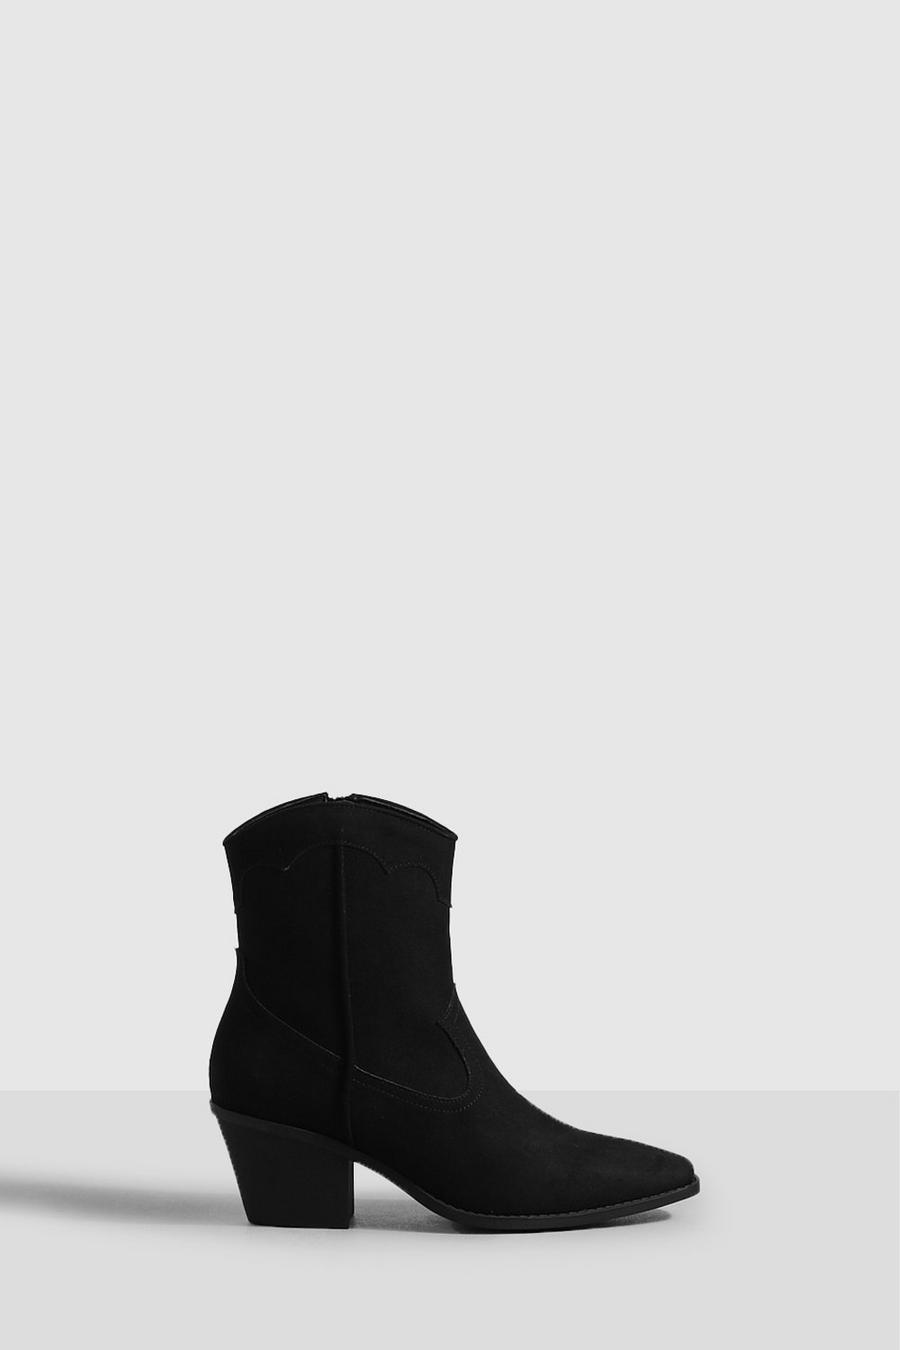 Black Cowboy Western Ankle Boots